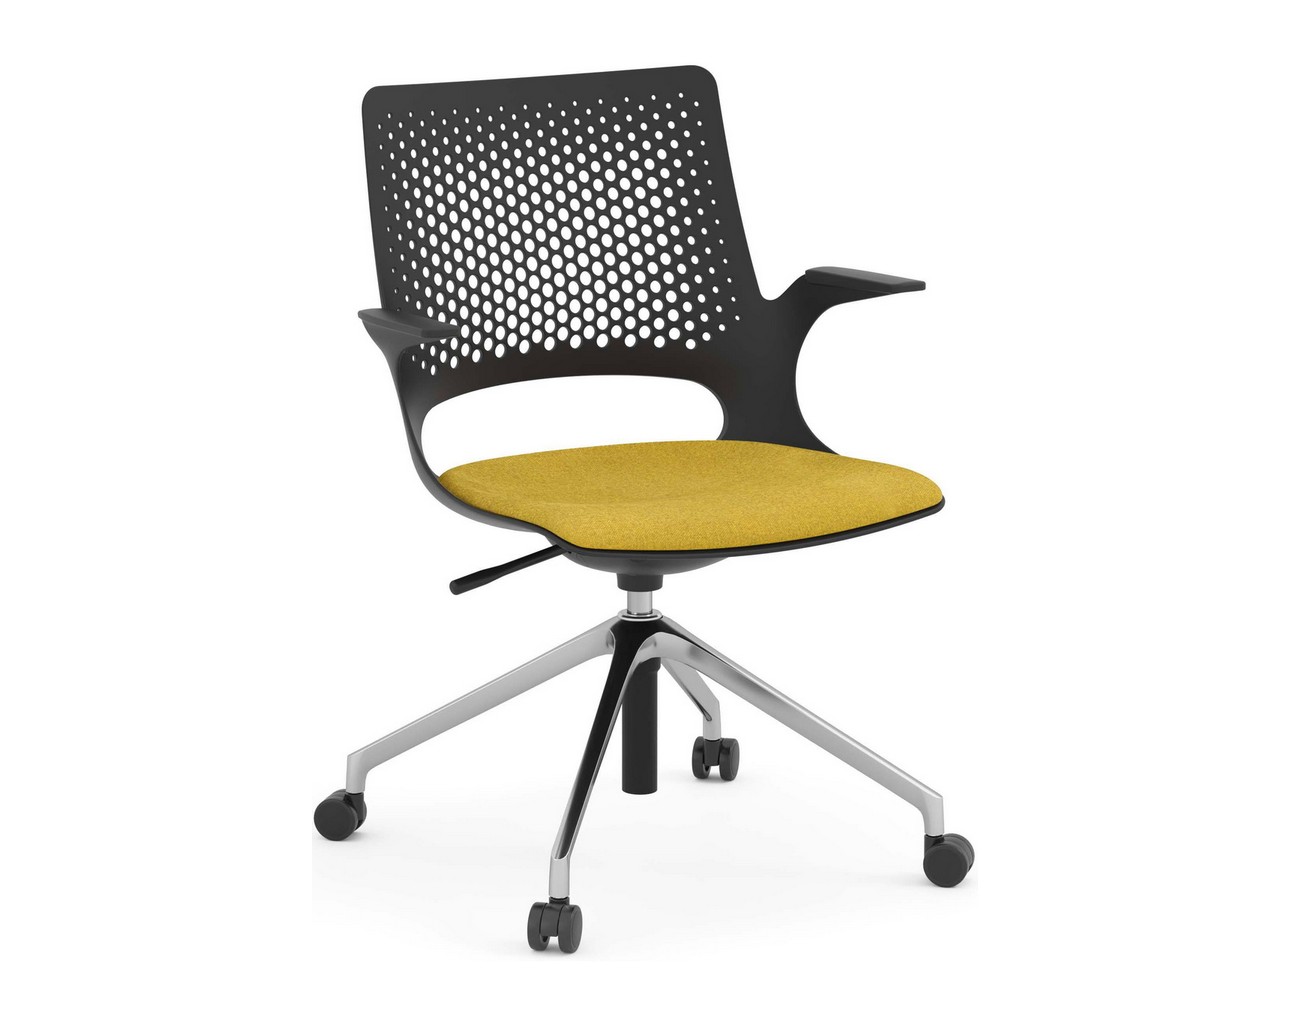 Harmony Multi-Purpose Chair – Polished Aluminum Base and Black Frame with Mustard Seat